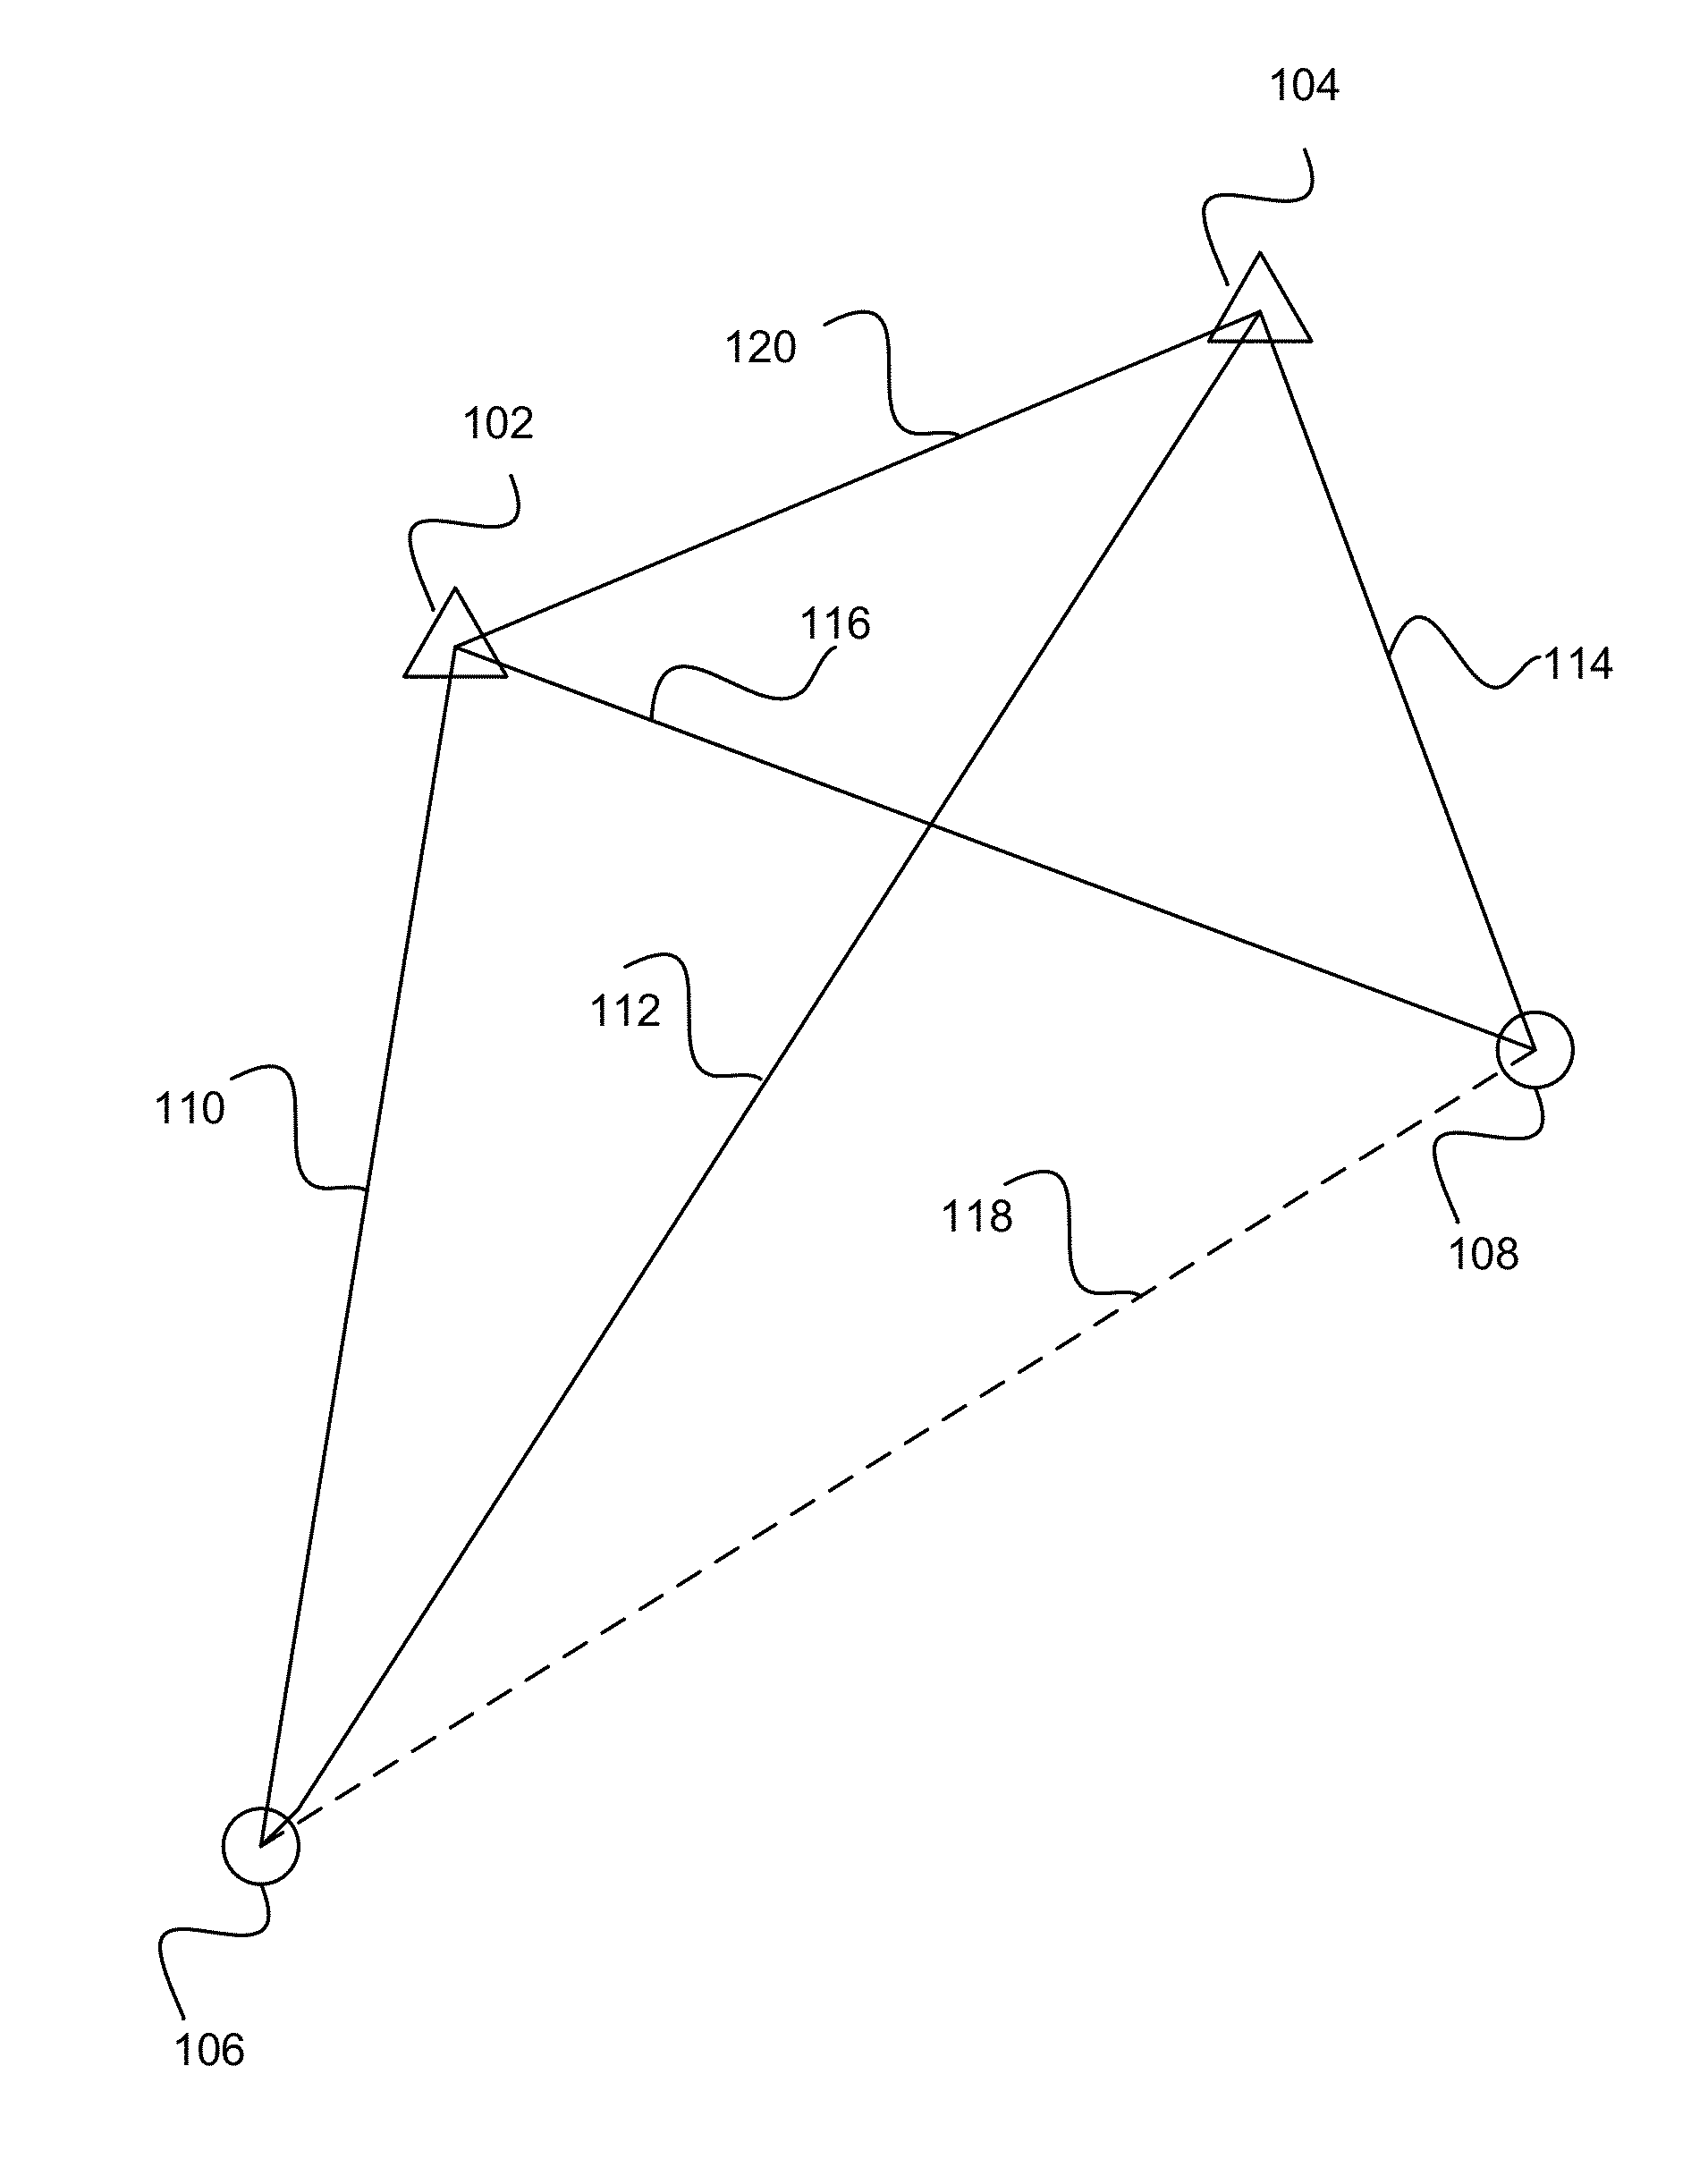 Method and apparatus for determining locations of access points